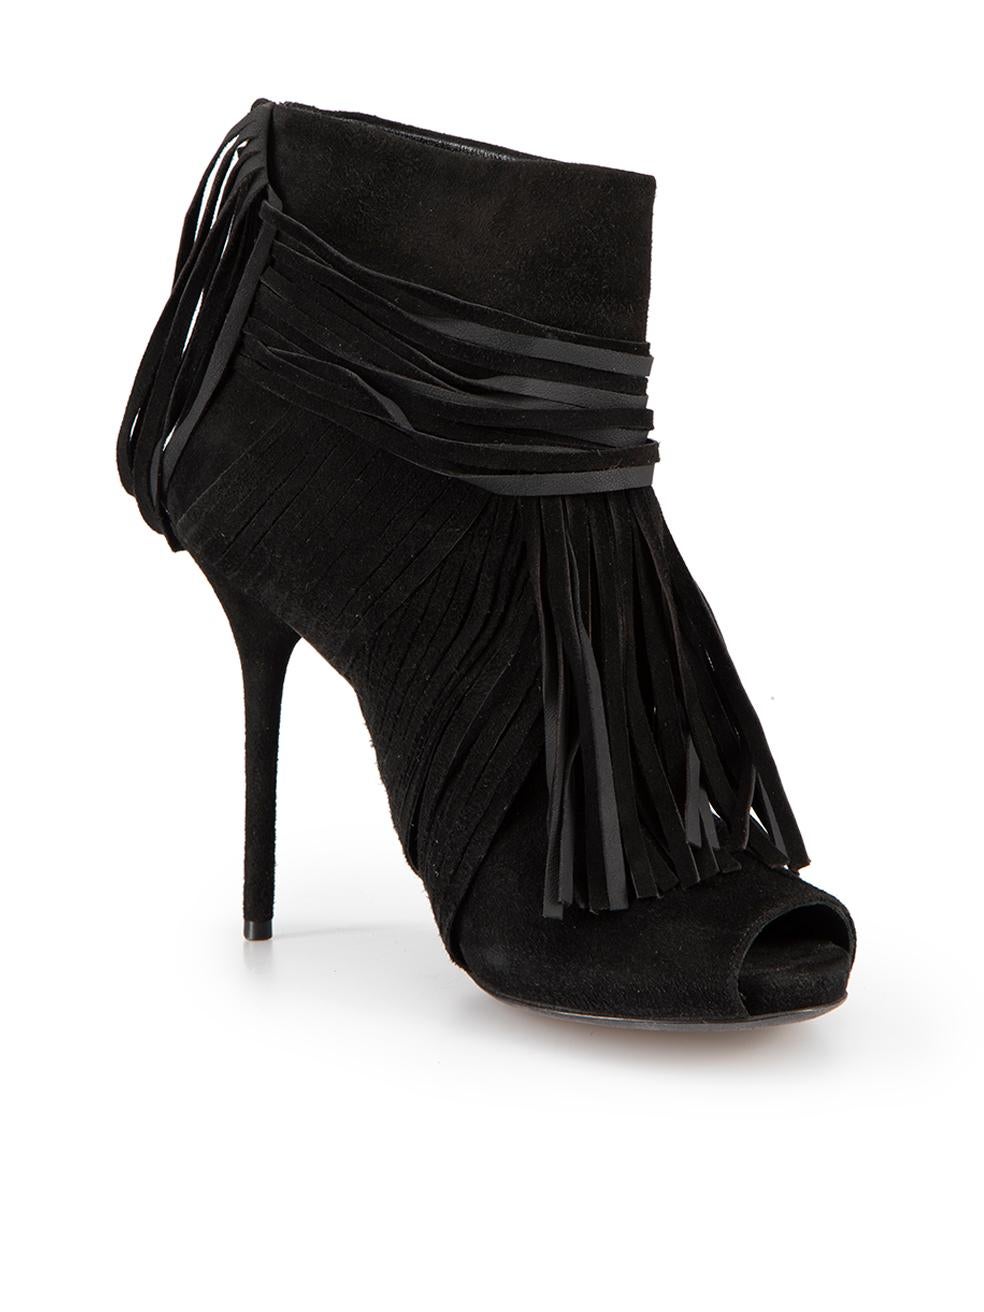 CONDITION is Very good. Minimal wear to shoes is evident. Minimal wear to both heels on this used Gucci designer resale item. These shoes come with original dust bag.



Details


Black

Suede

Ankle boots

Peep toe

High heel

Fringed and tassel